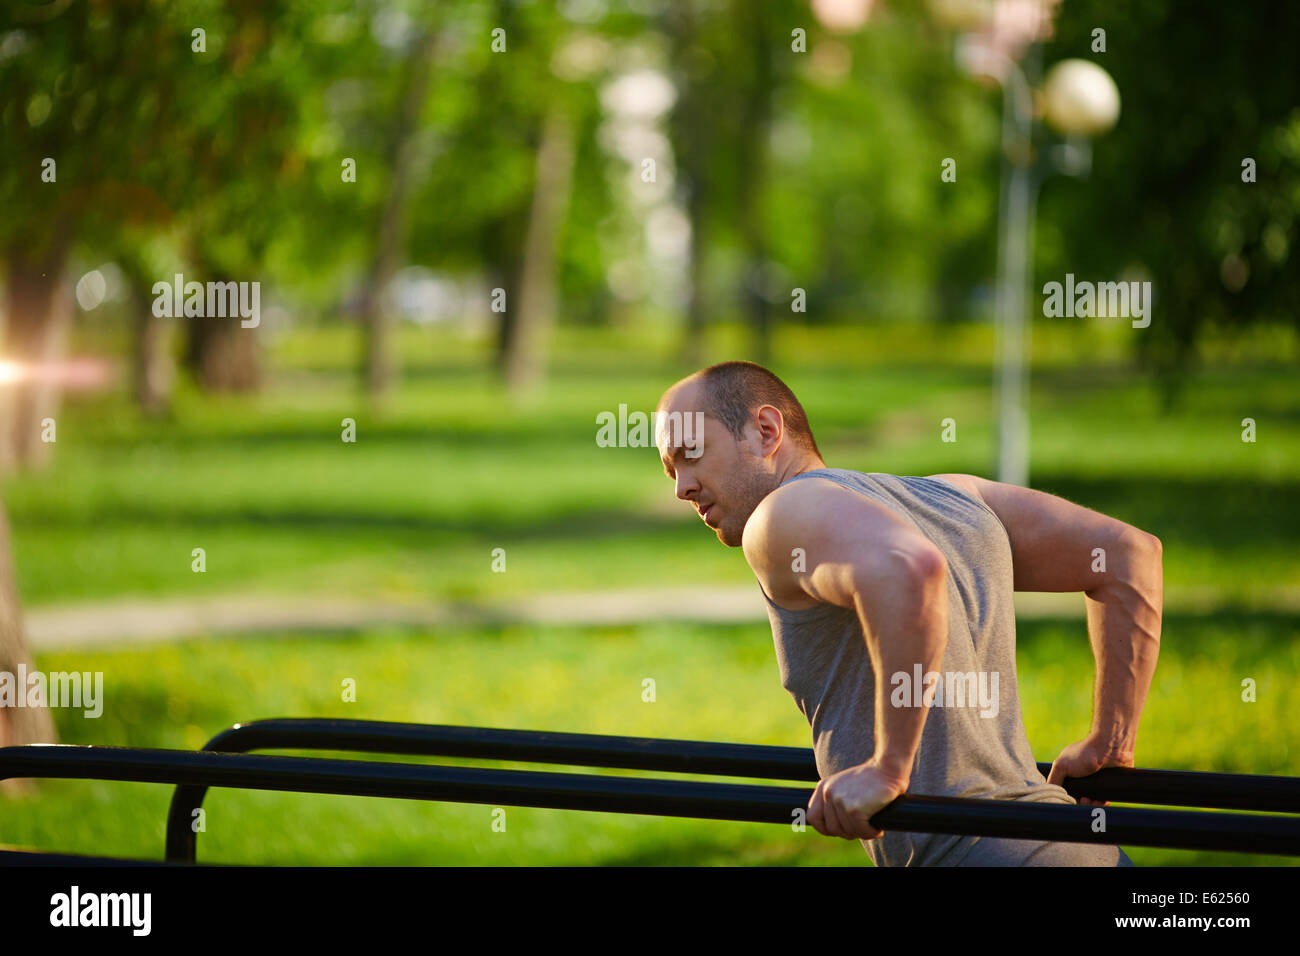 Young man having physical training on sport equipment outside Stock Photo